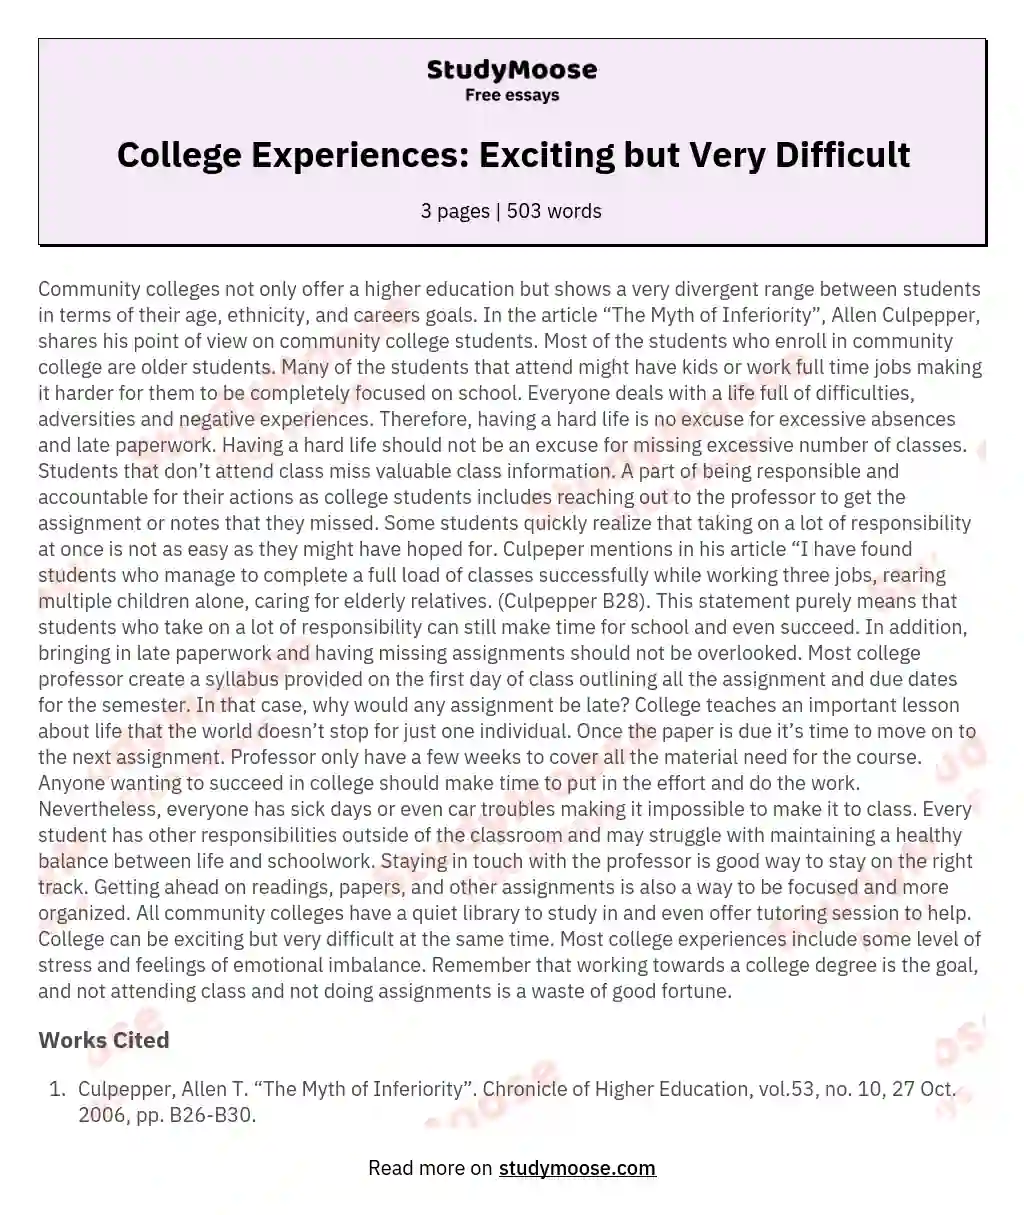 College Experiences: Exciting but Very Difficult essay